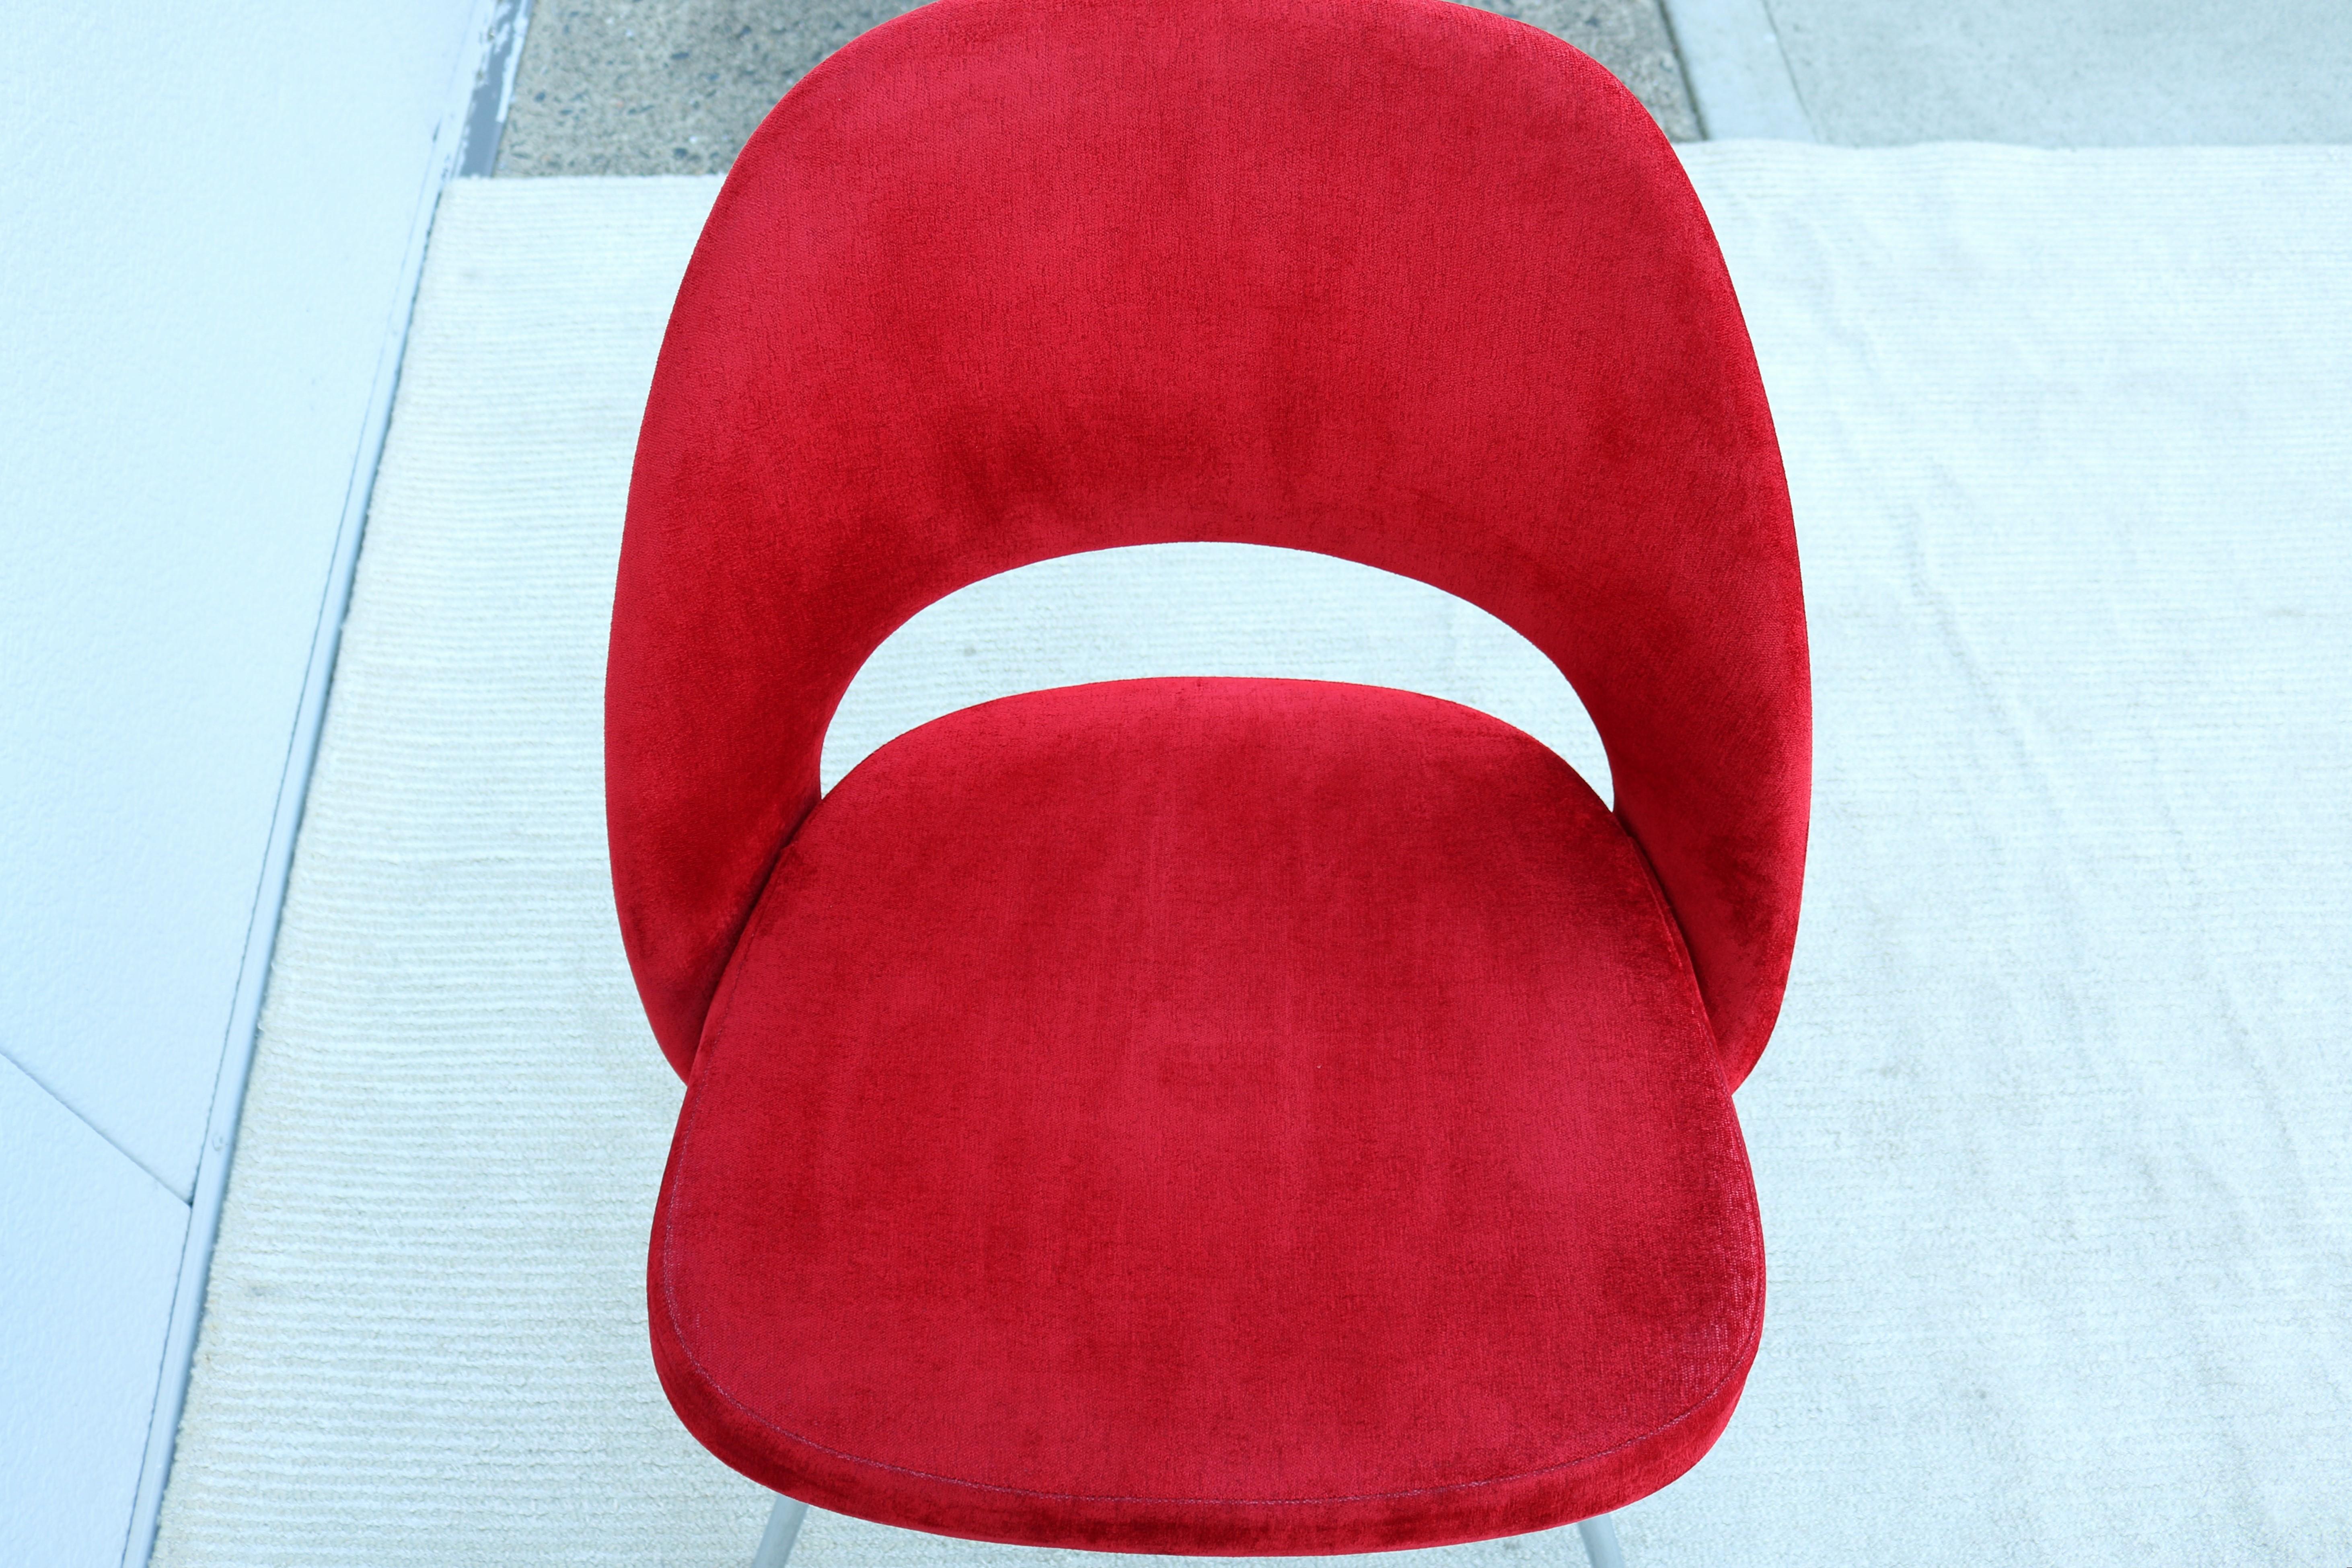 Mid-Century Modern Eero Saarinen for Knoll Red Executive Armless Chairs - a Pair For Sale 7